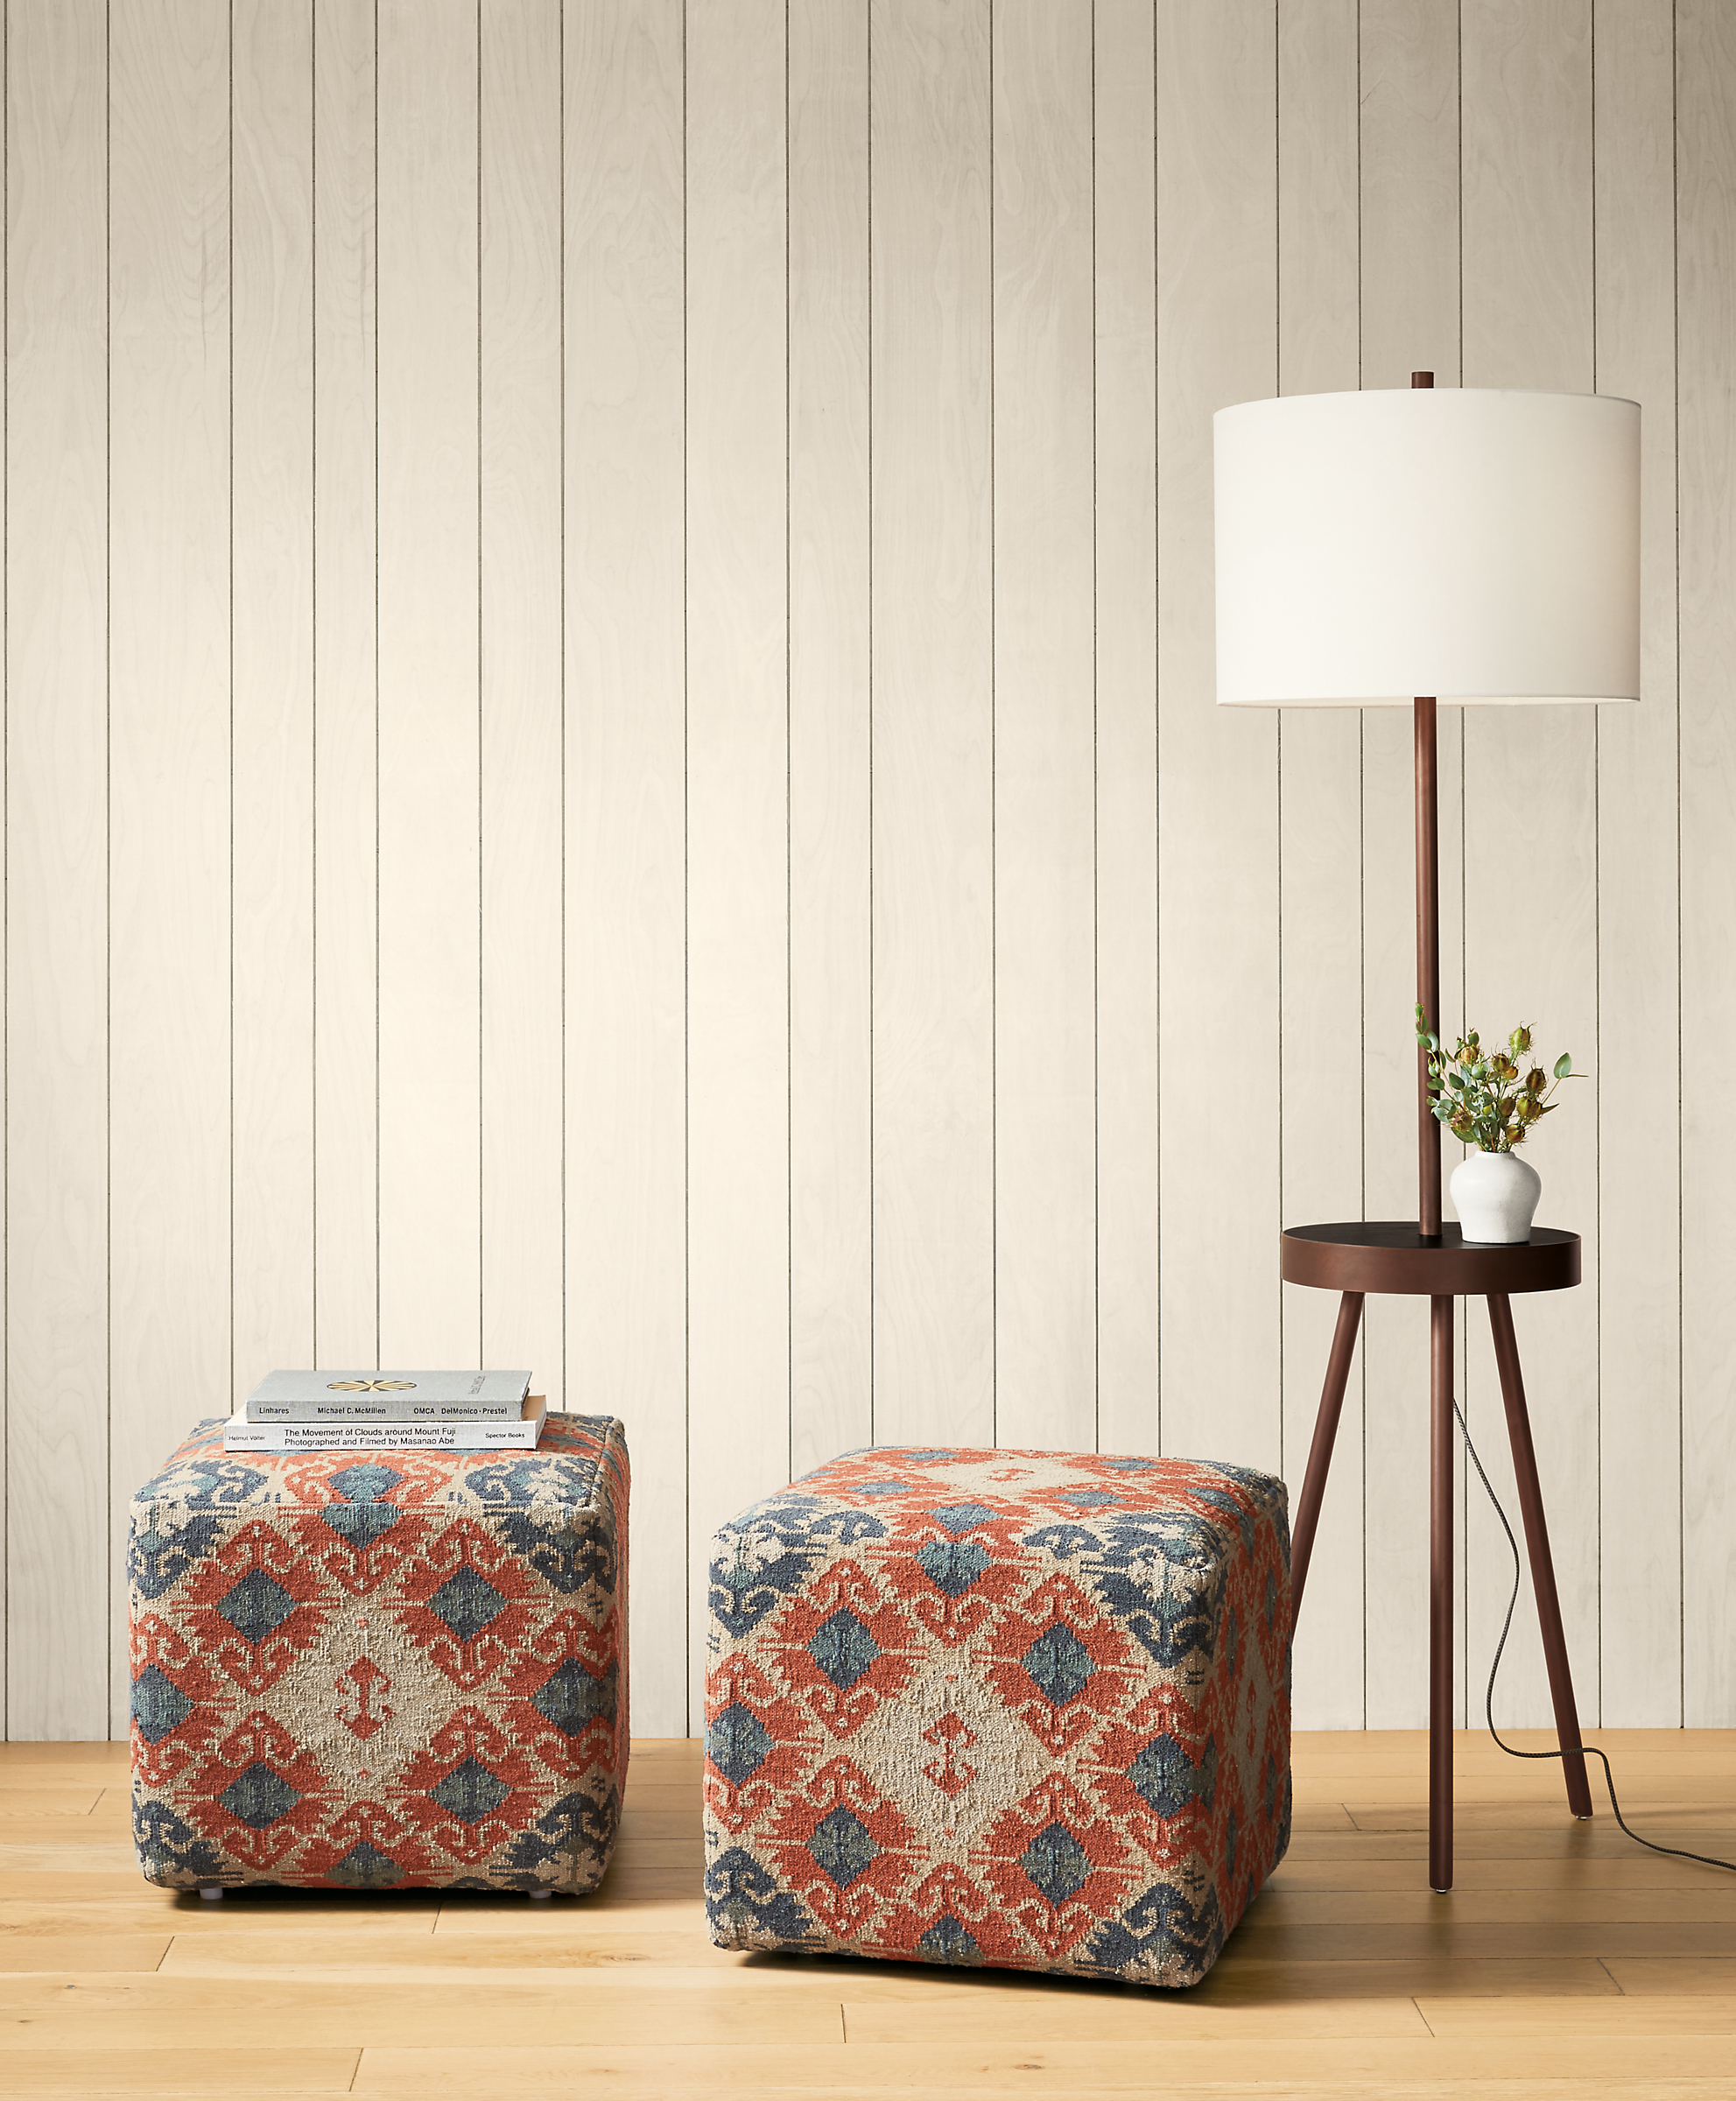 Detail of 2 Indira square ottomans in Paprika beside Winford floor lamp.